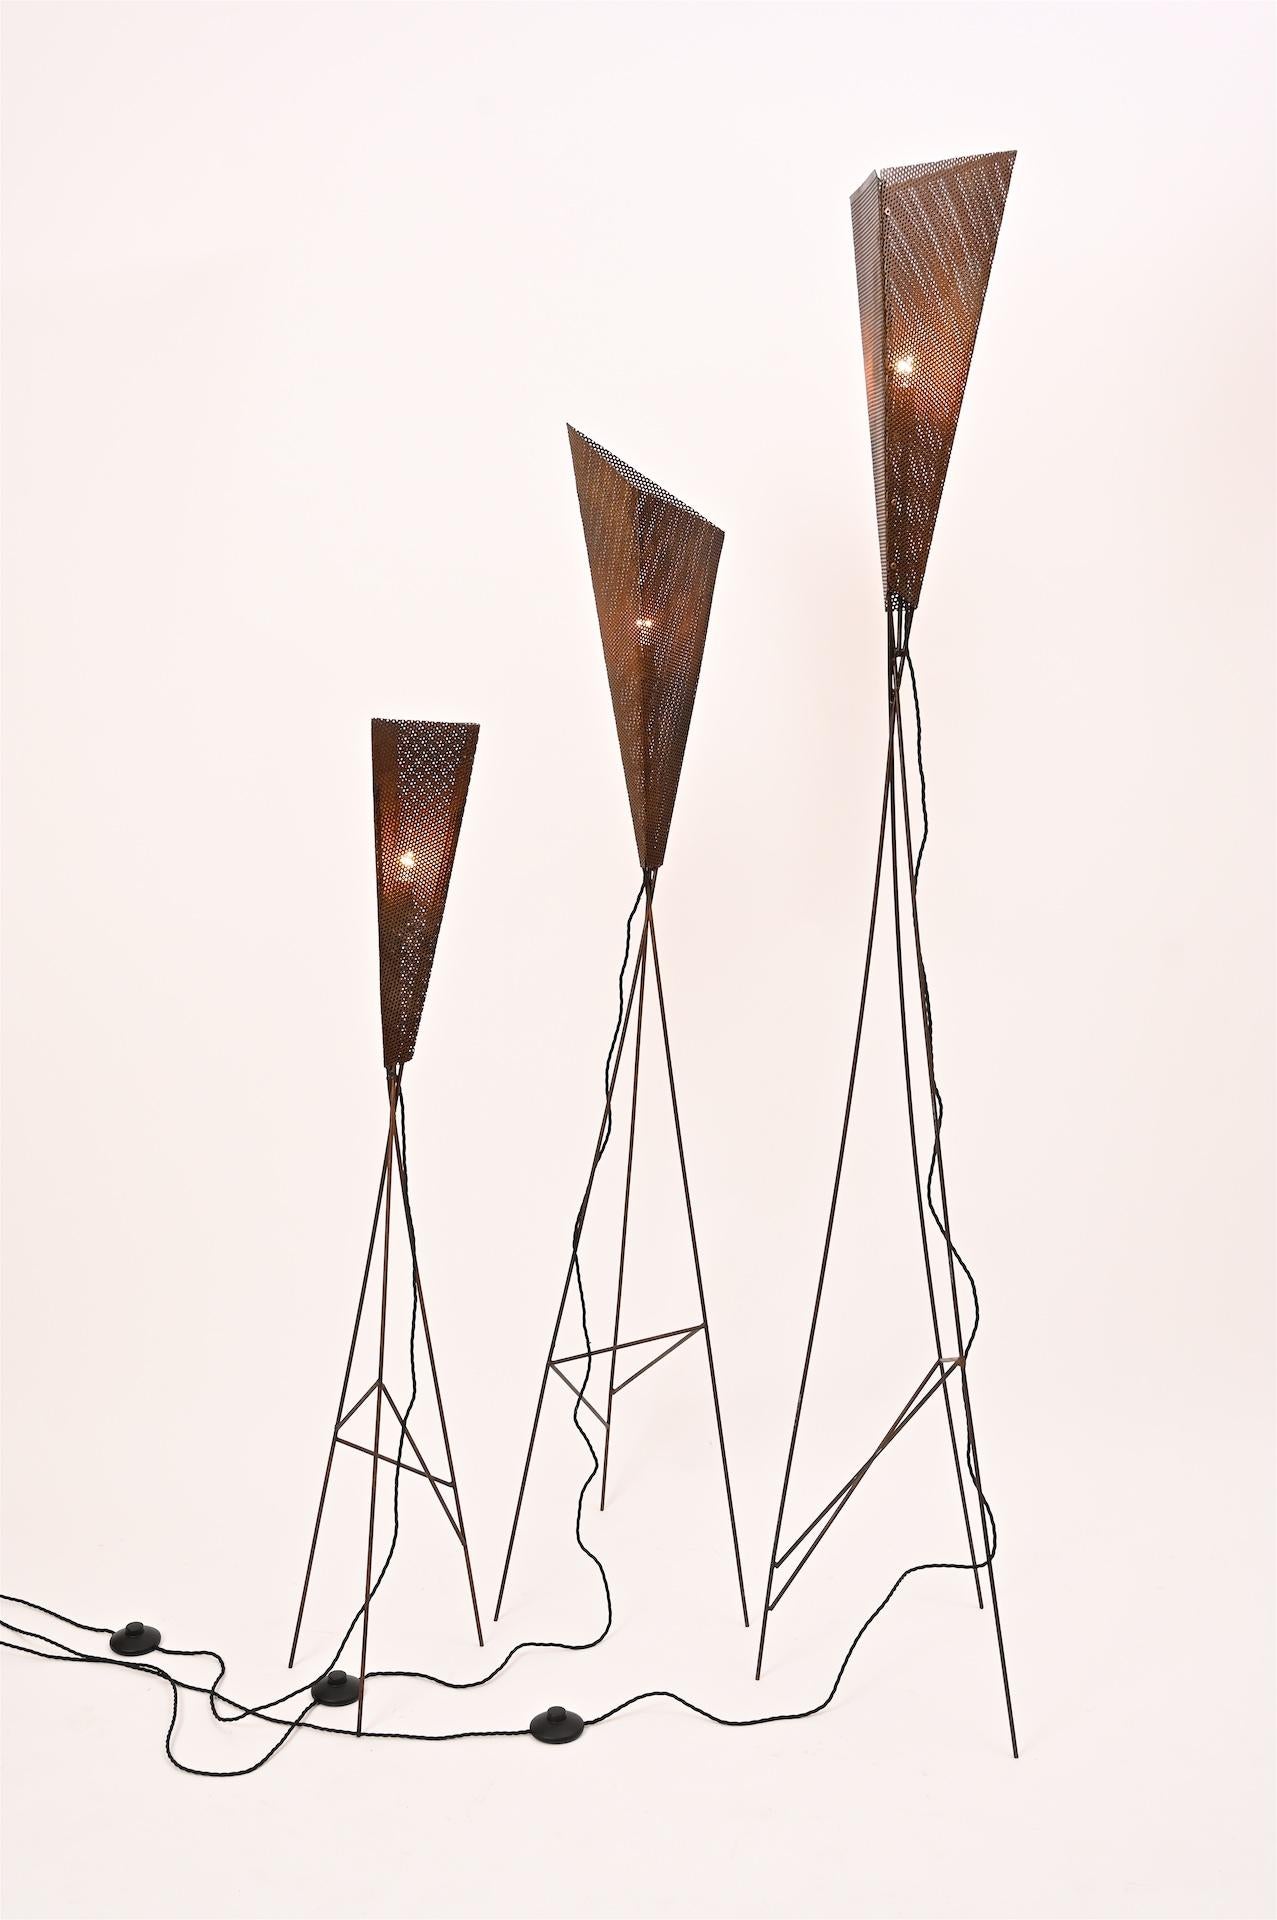 Three tripod floor lamps with perforated metal shades, France, circa 1950.

Sculptural metal lights with great patina

The tallest height 197cm
Shortest 127cm

Re wired fully working each with foot switch

